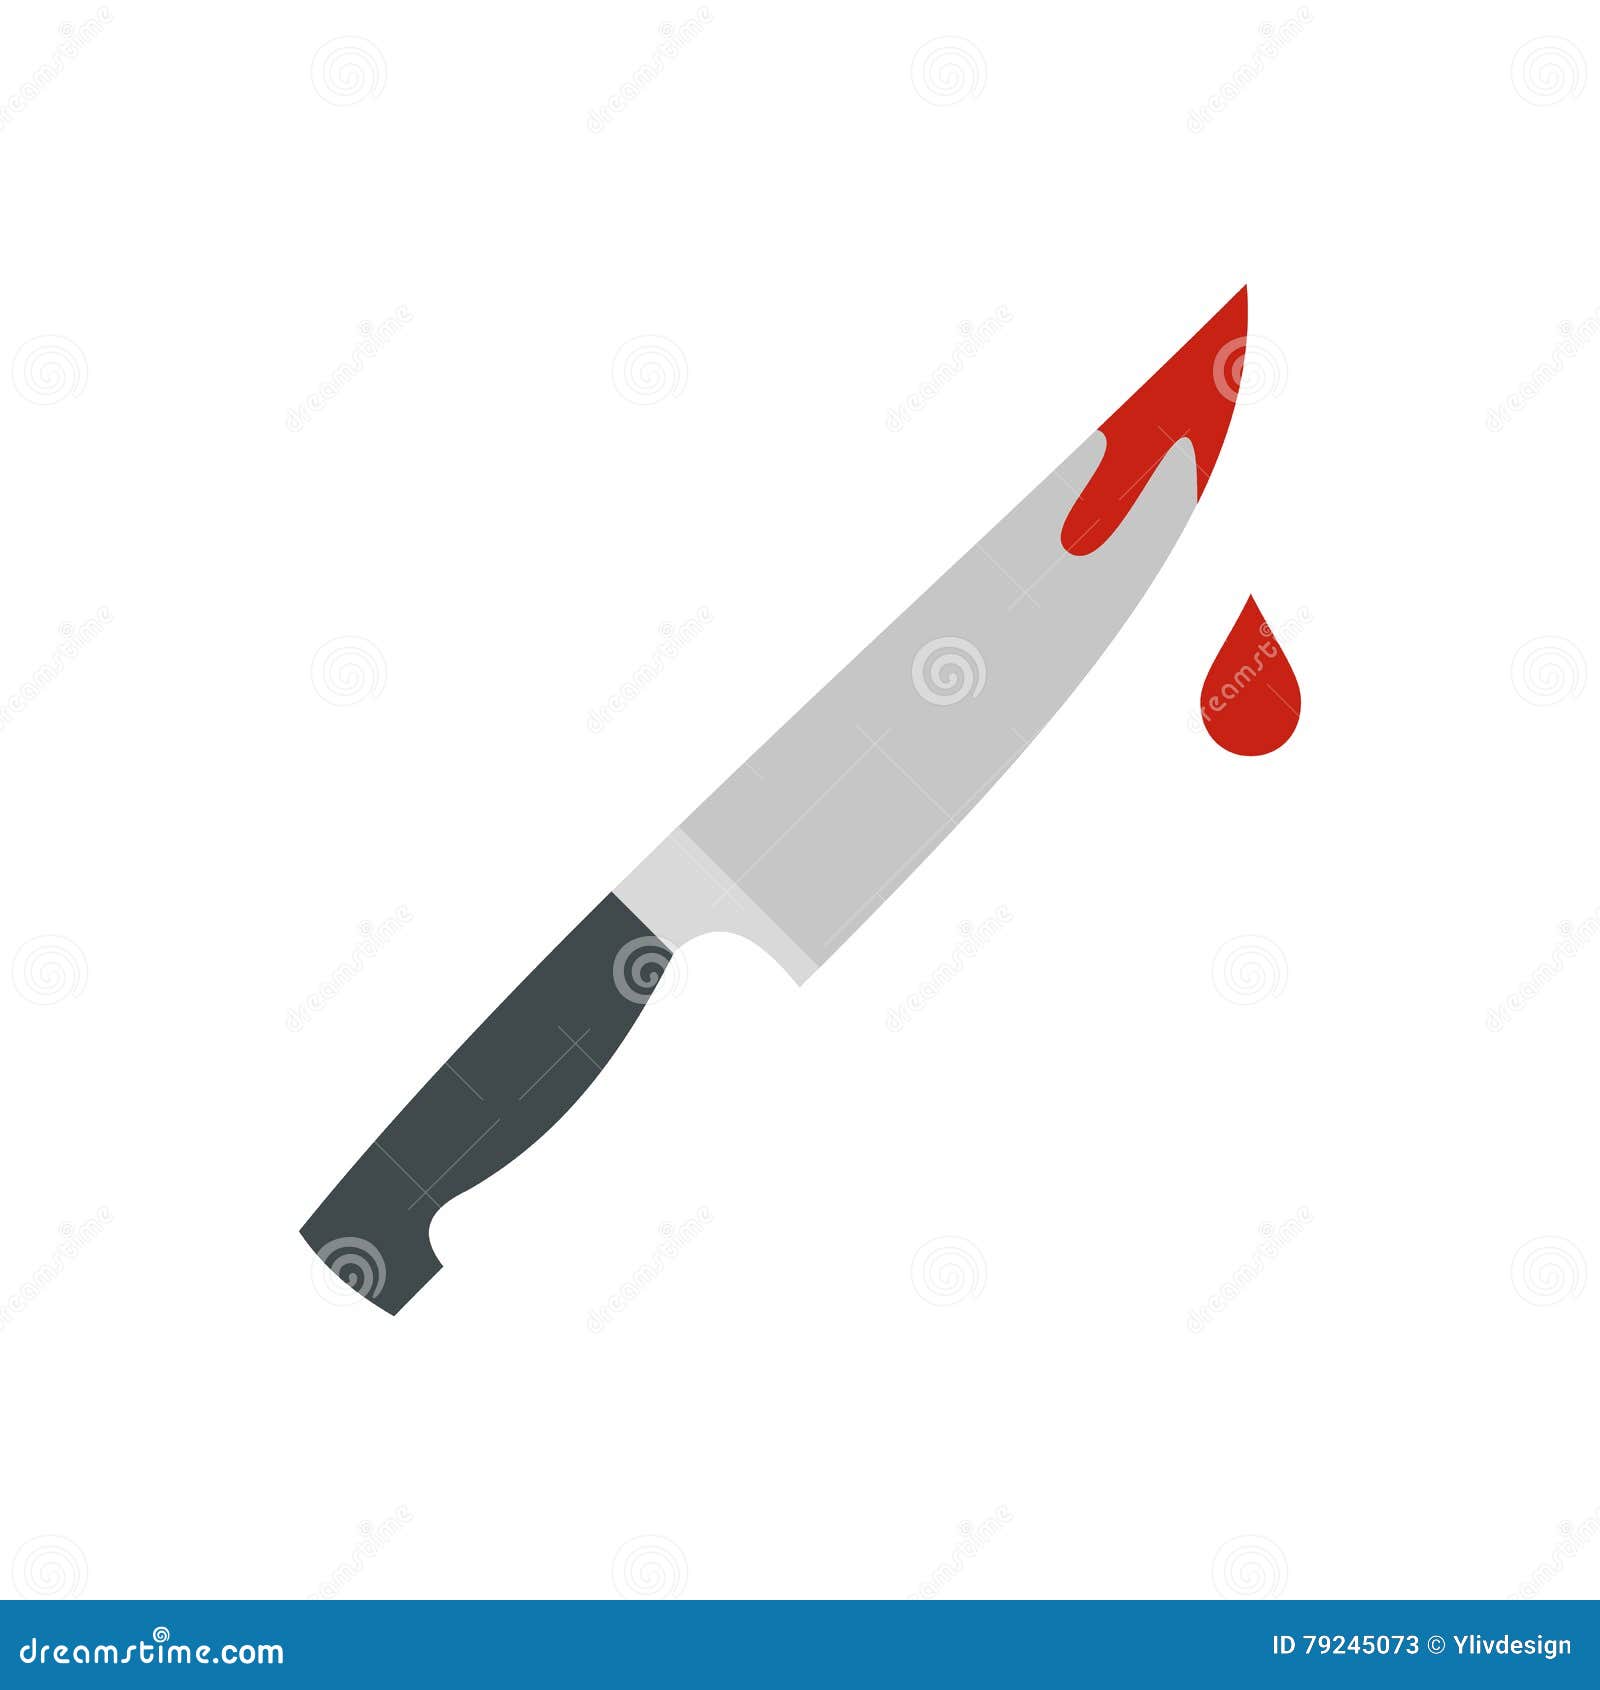 bloody knife icon, flat style